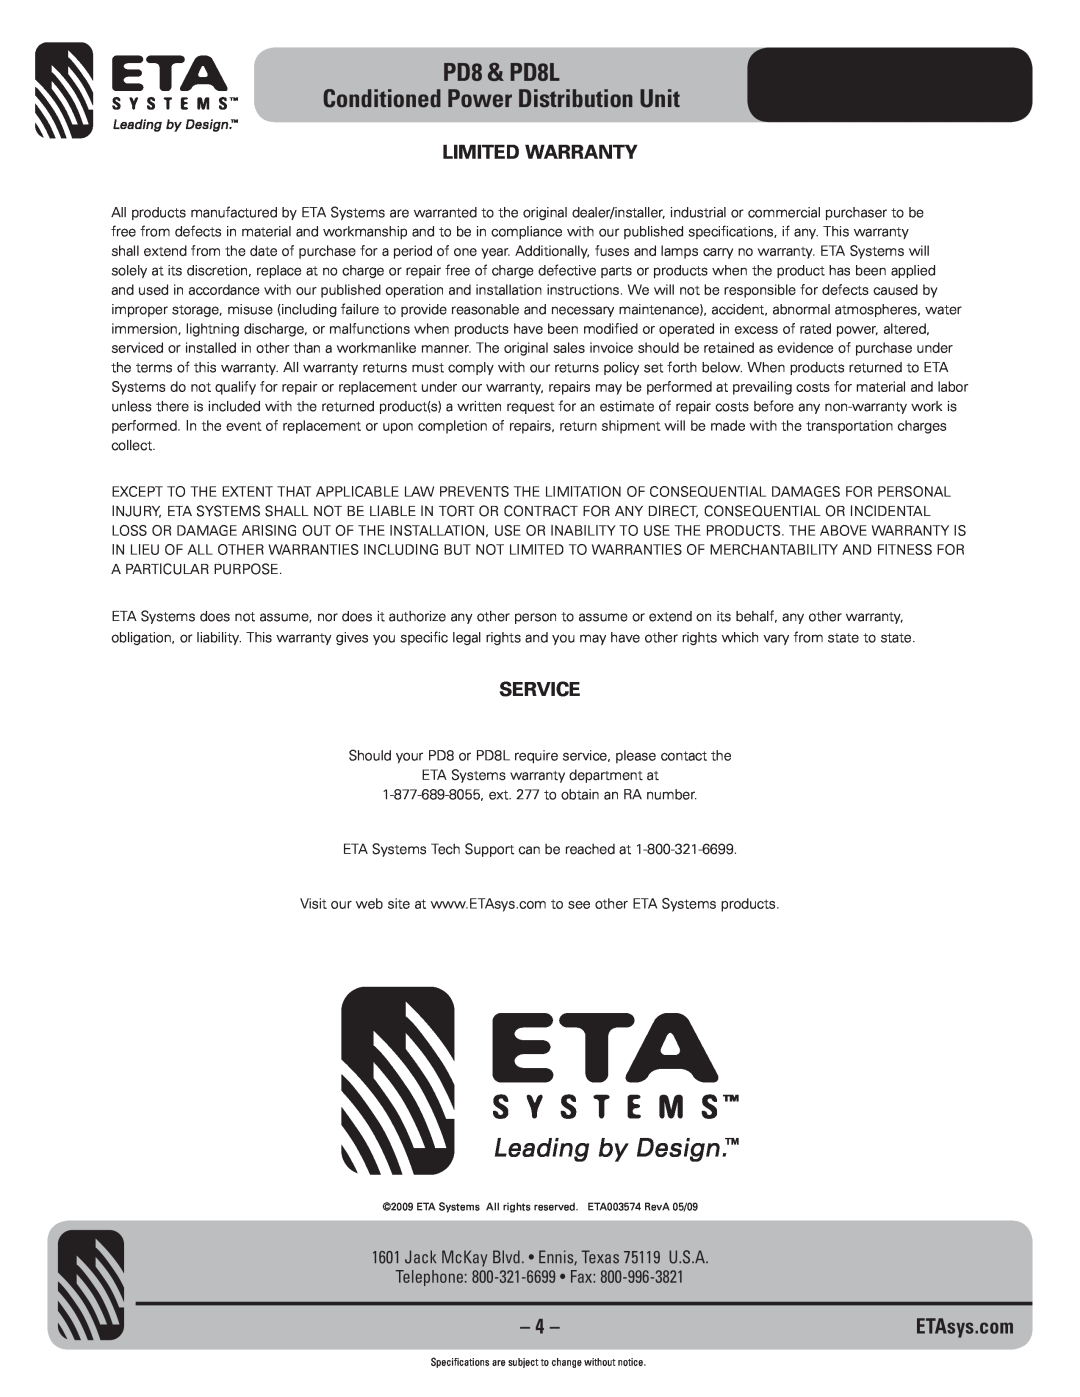 ETA Systems Limited Warranty, Service, PD8 & PD8L Conditioned Power Distribution Unit, Telephone 800-321-6699 Fax 